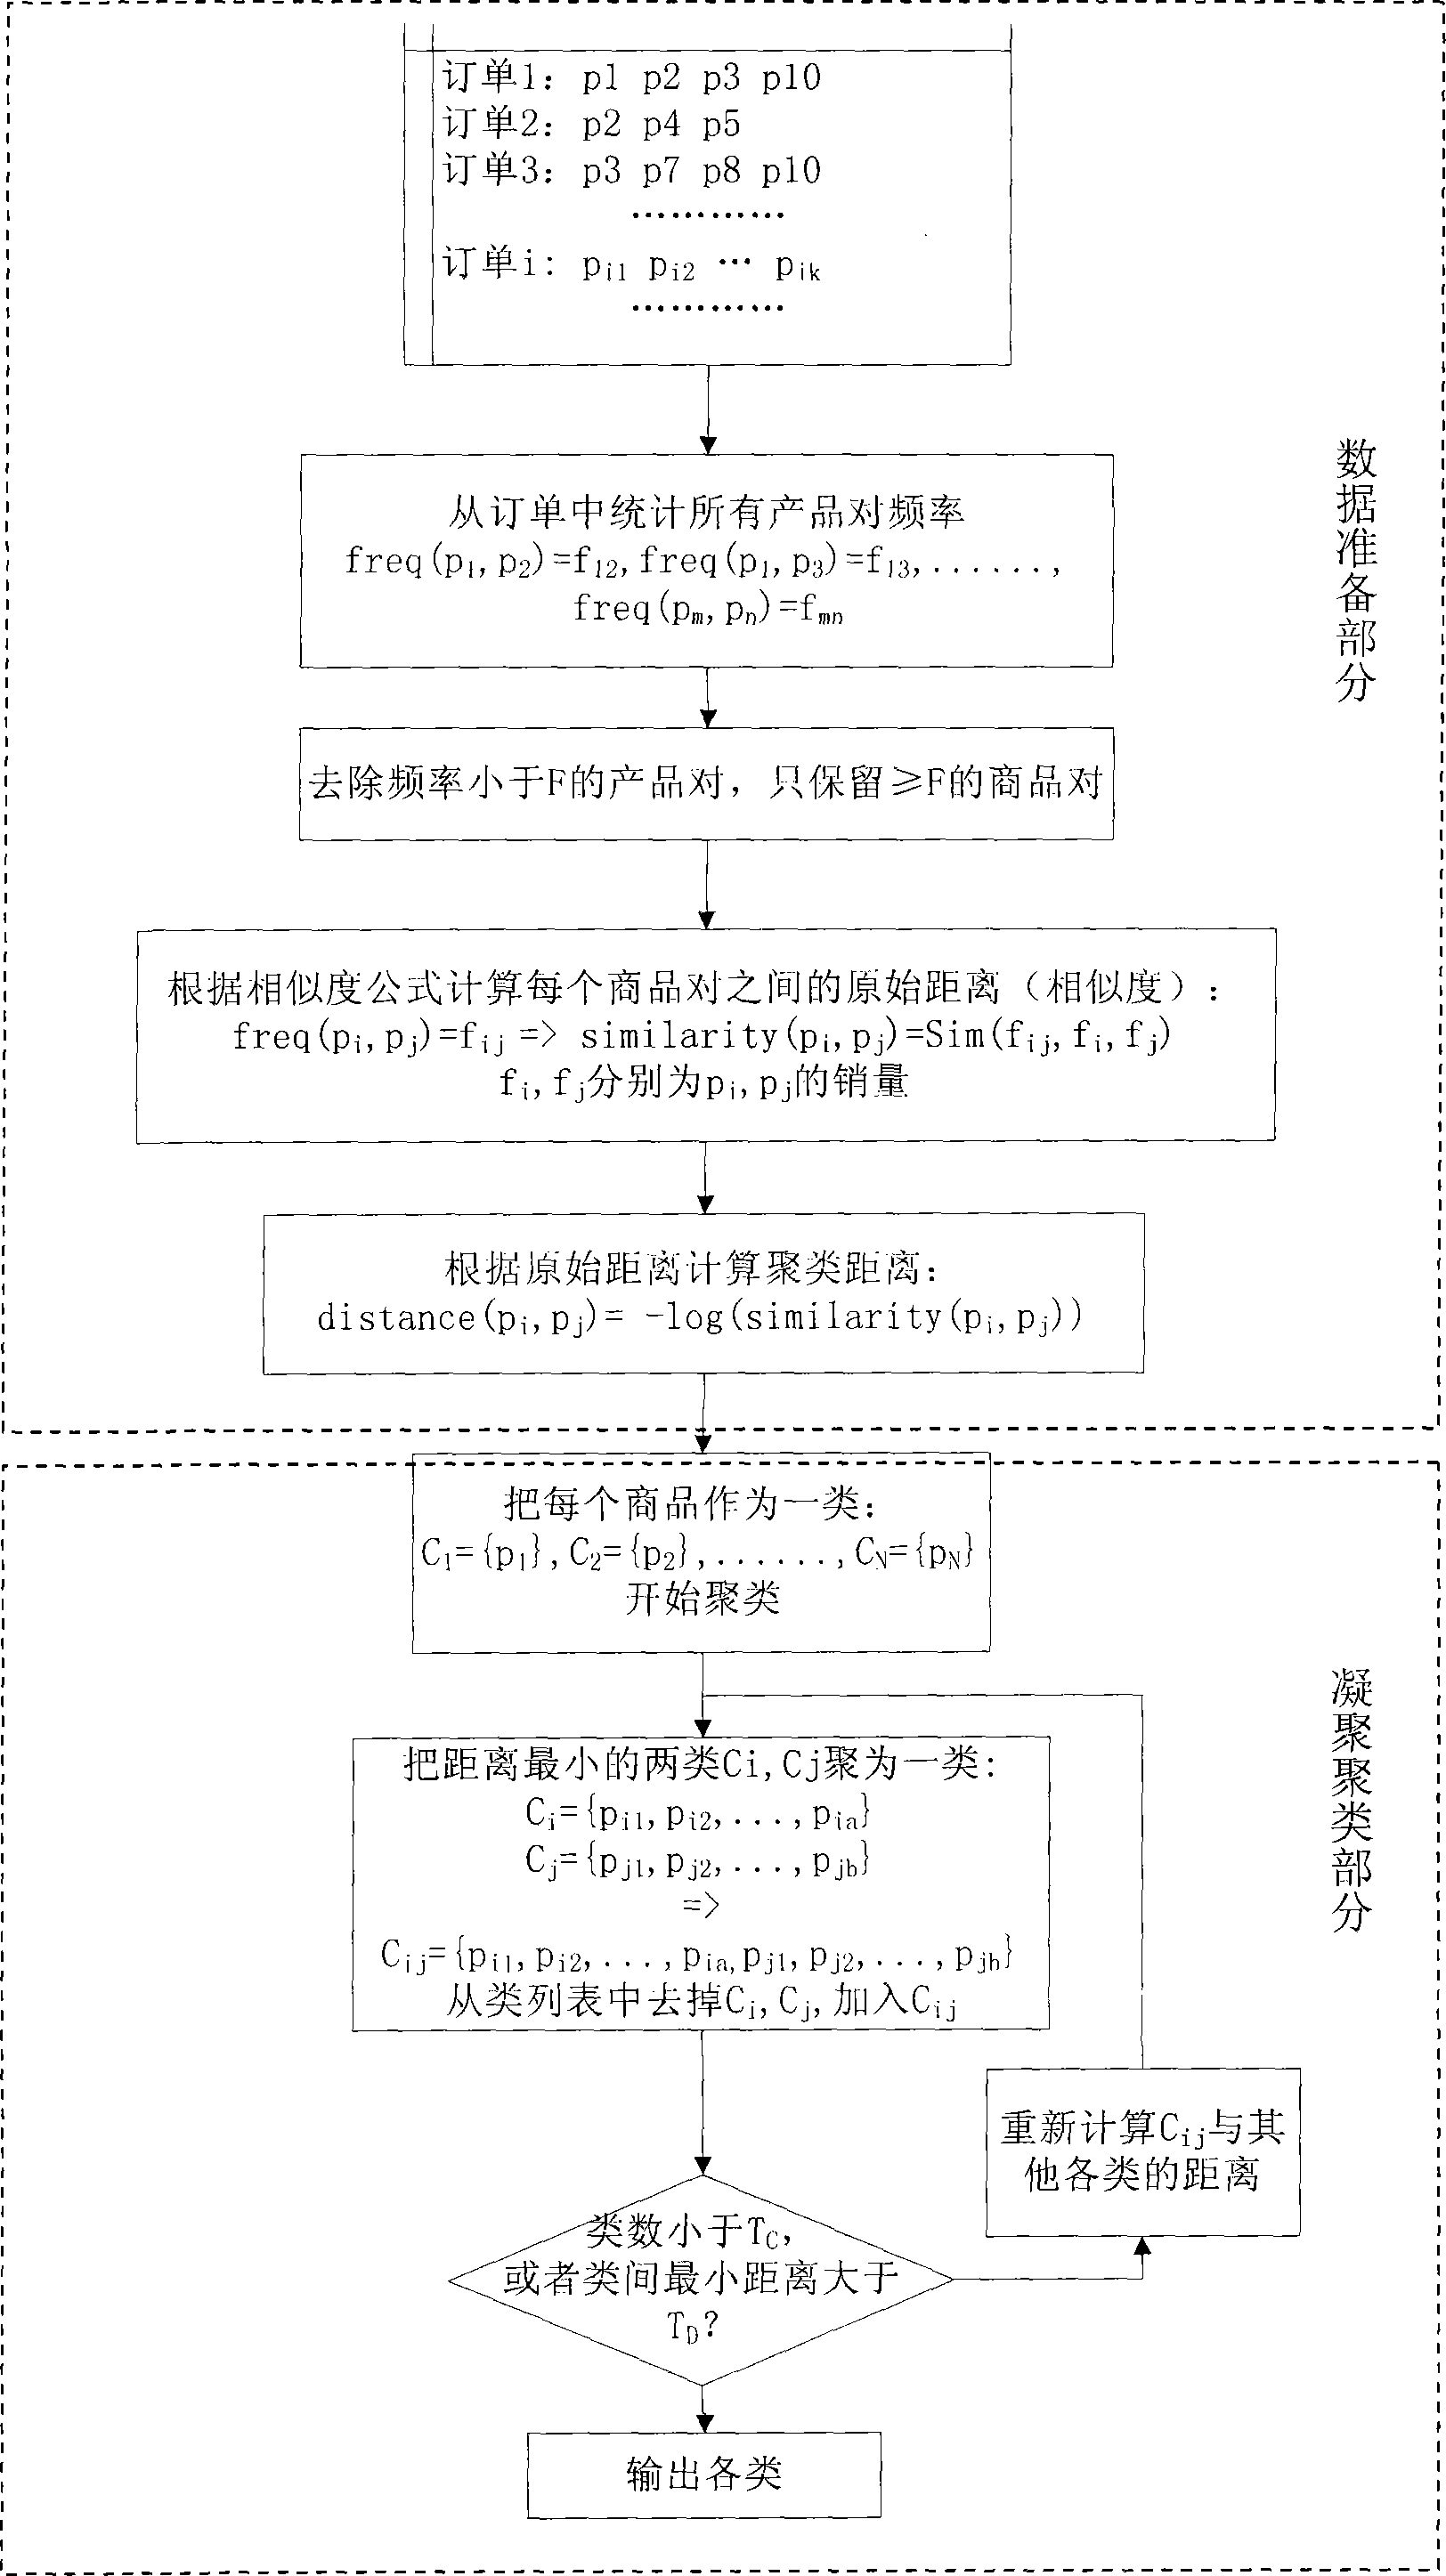 Commercial articles clustering system and method based on shopping behaviors